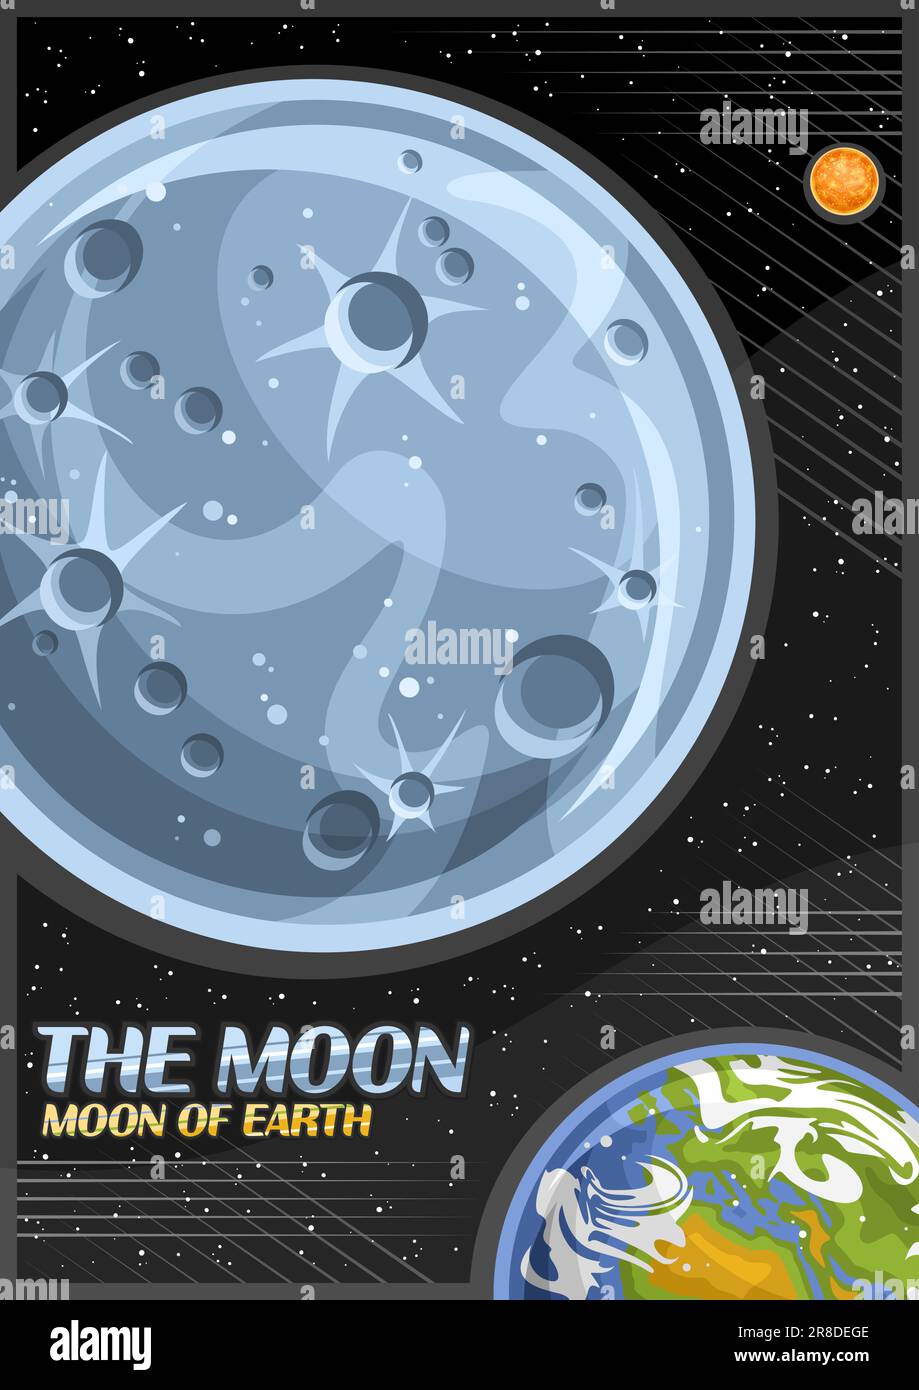 Vector Poster for the Moon, decorative vertical banner with illustration of rotating stone moon around cartoon earth planet on black starry background Stock Vector